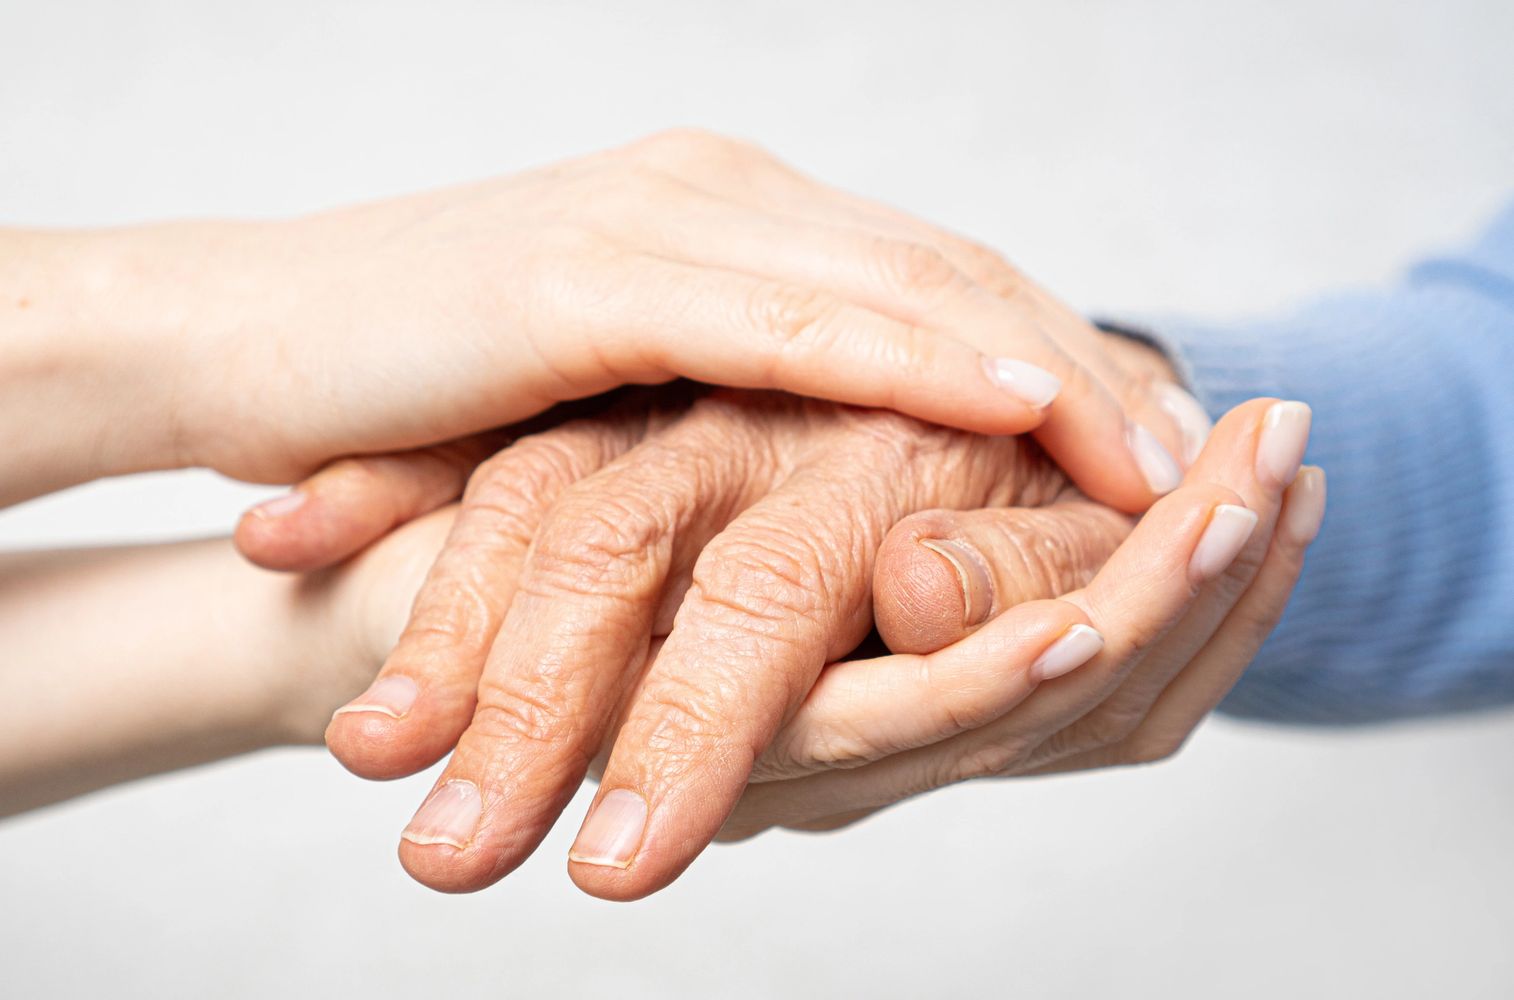 A carer holding an old person's hand